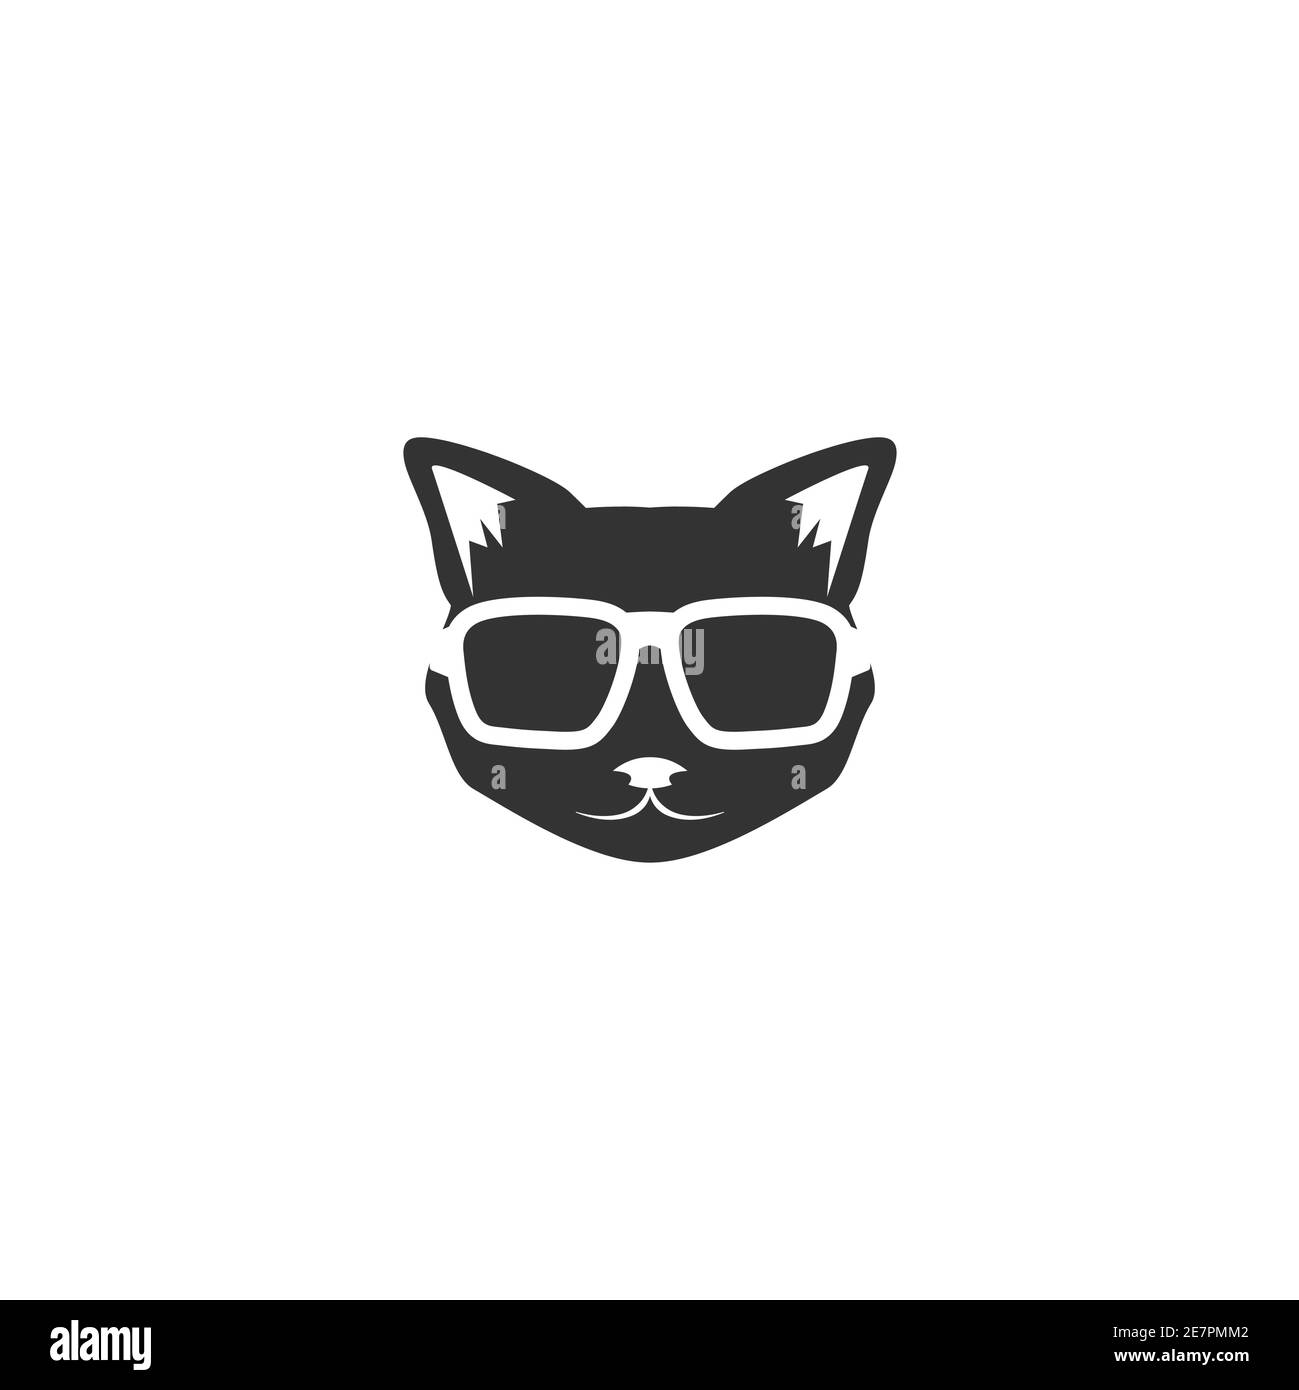 XPOSED  Black Cat Eyes Avatar PS4  buy online and track price history   PS Deals UK